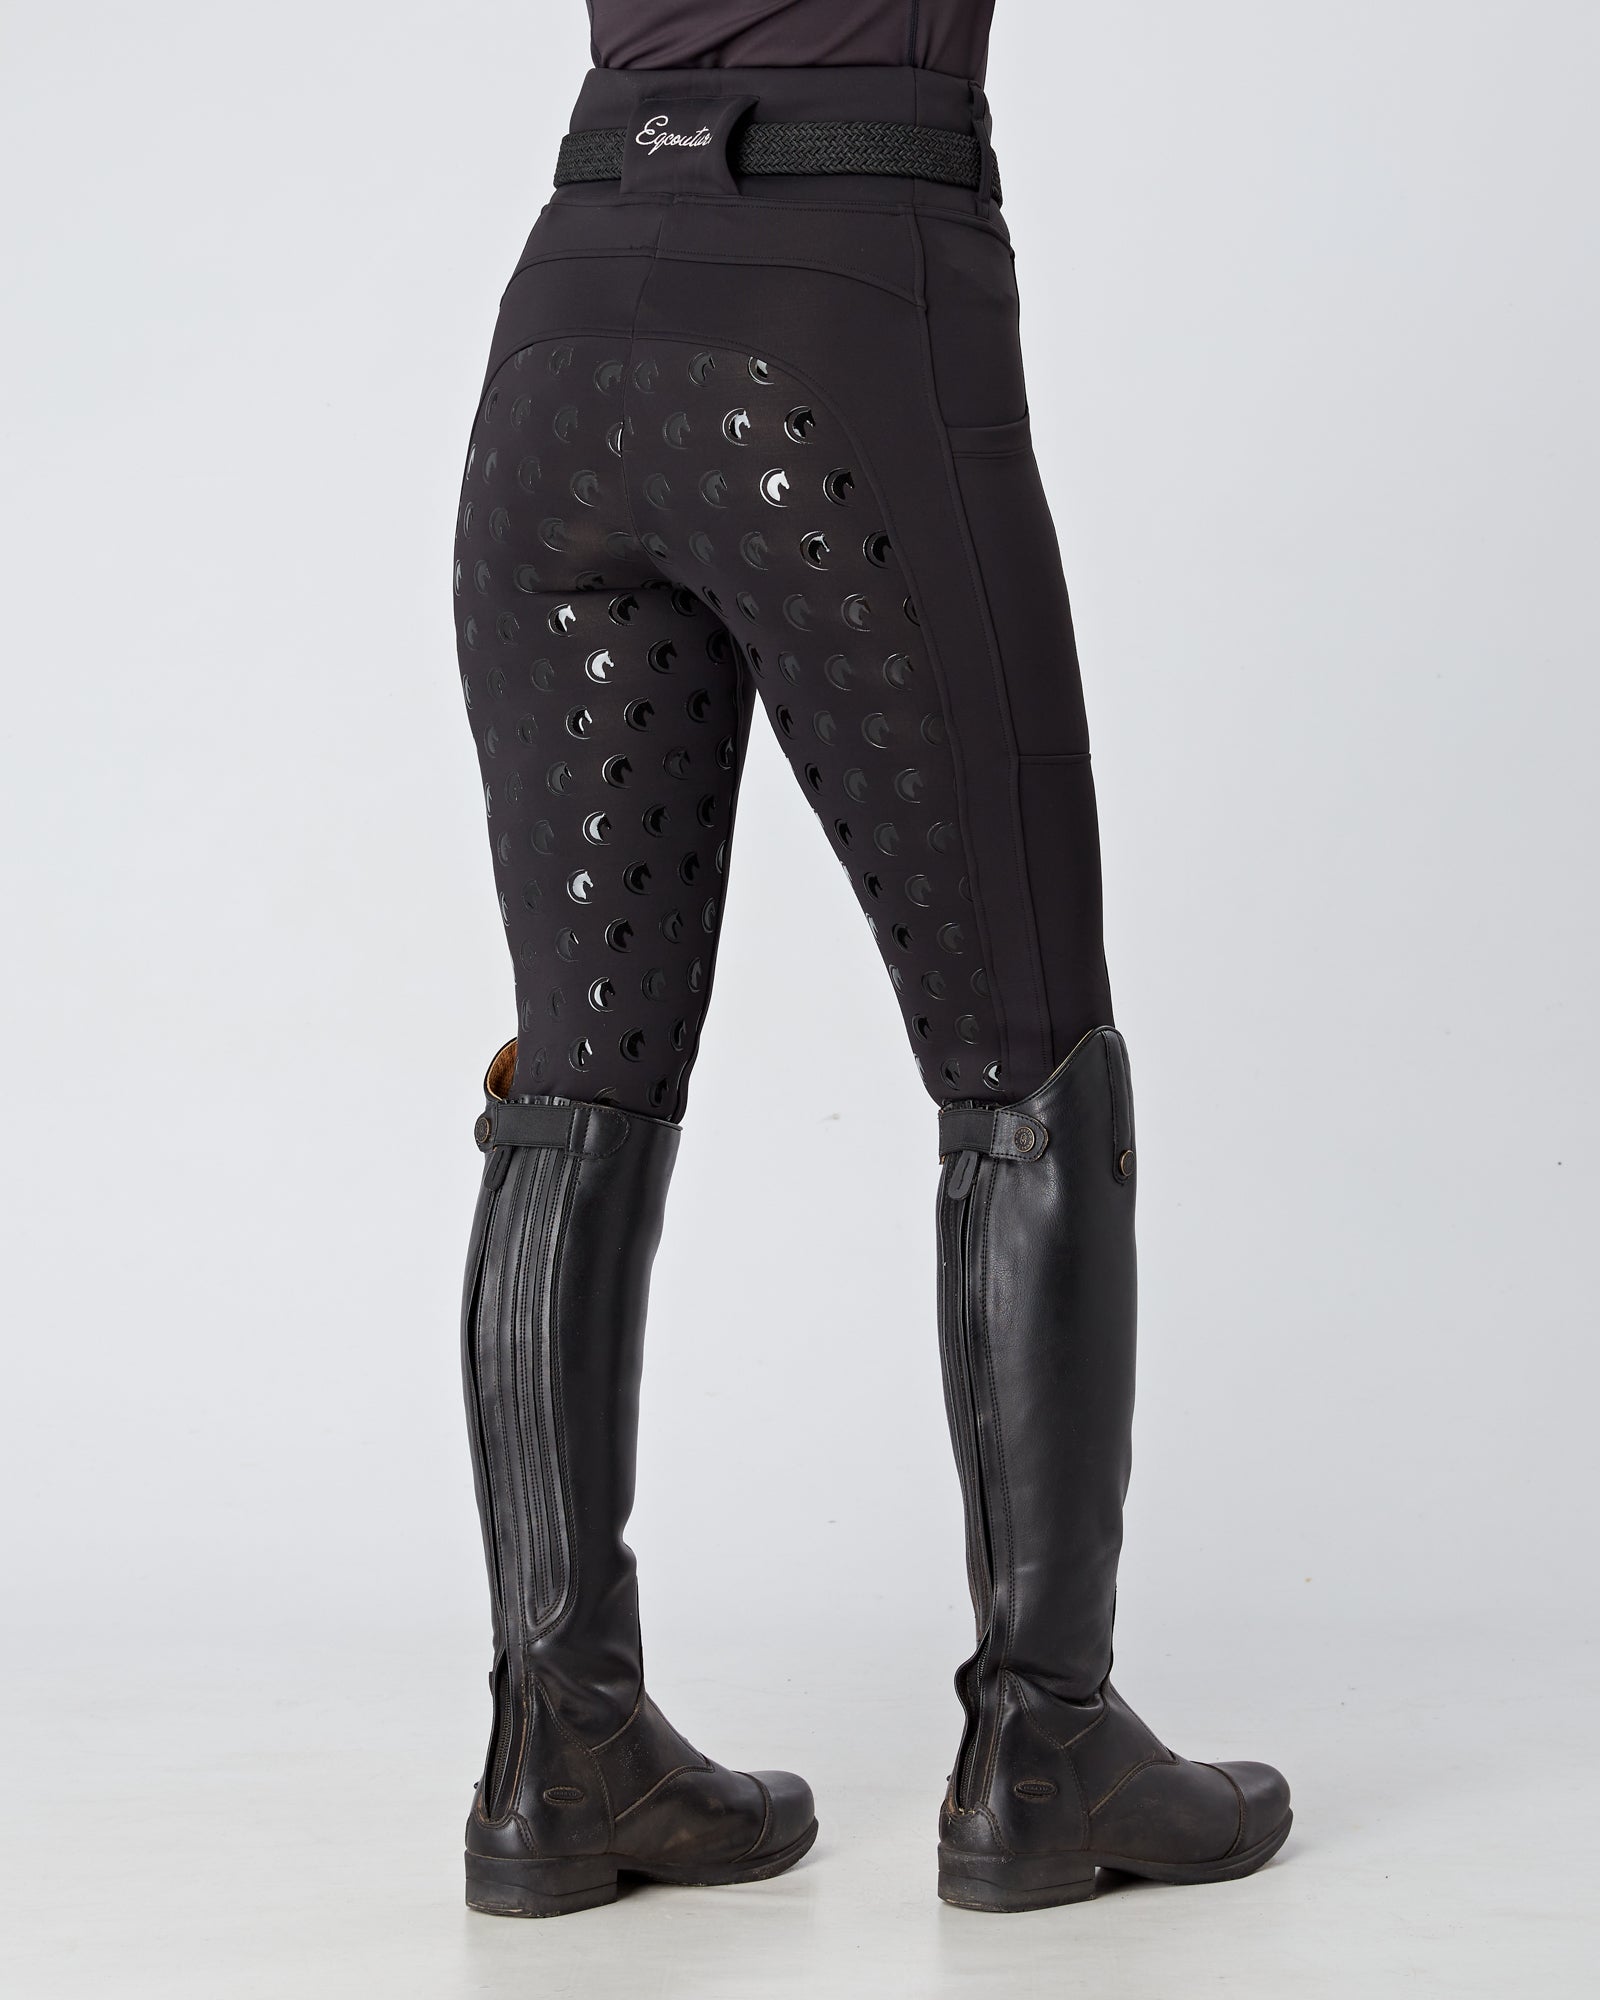 WINTER Thermal Riding Tights / Leggings with phone pockets - BLACK –  Eqcouture